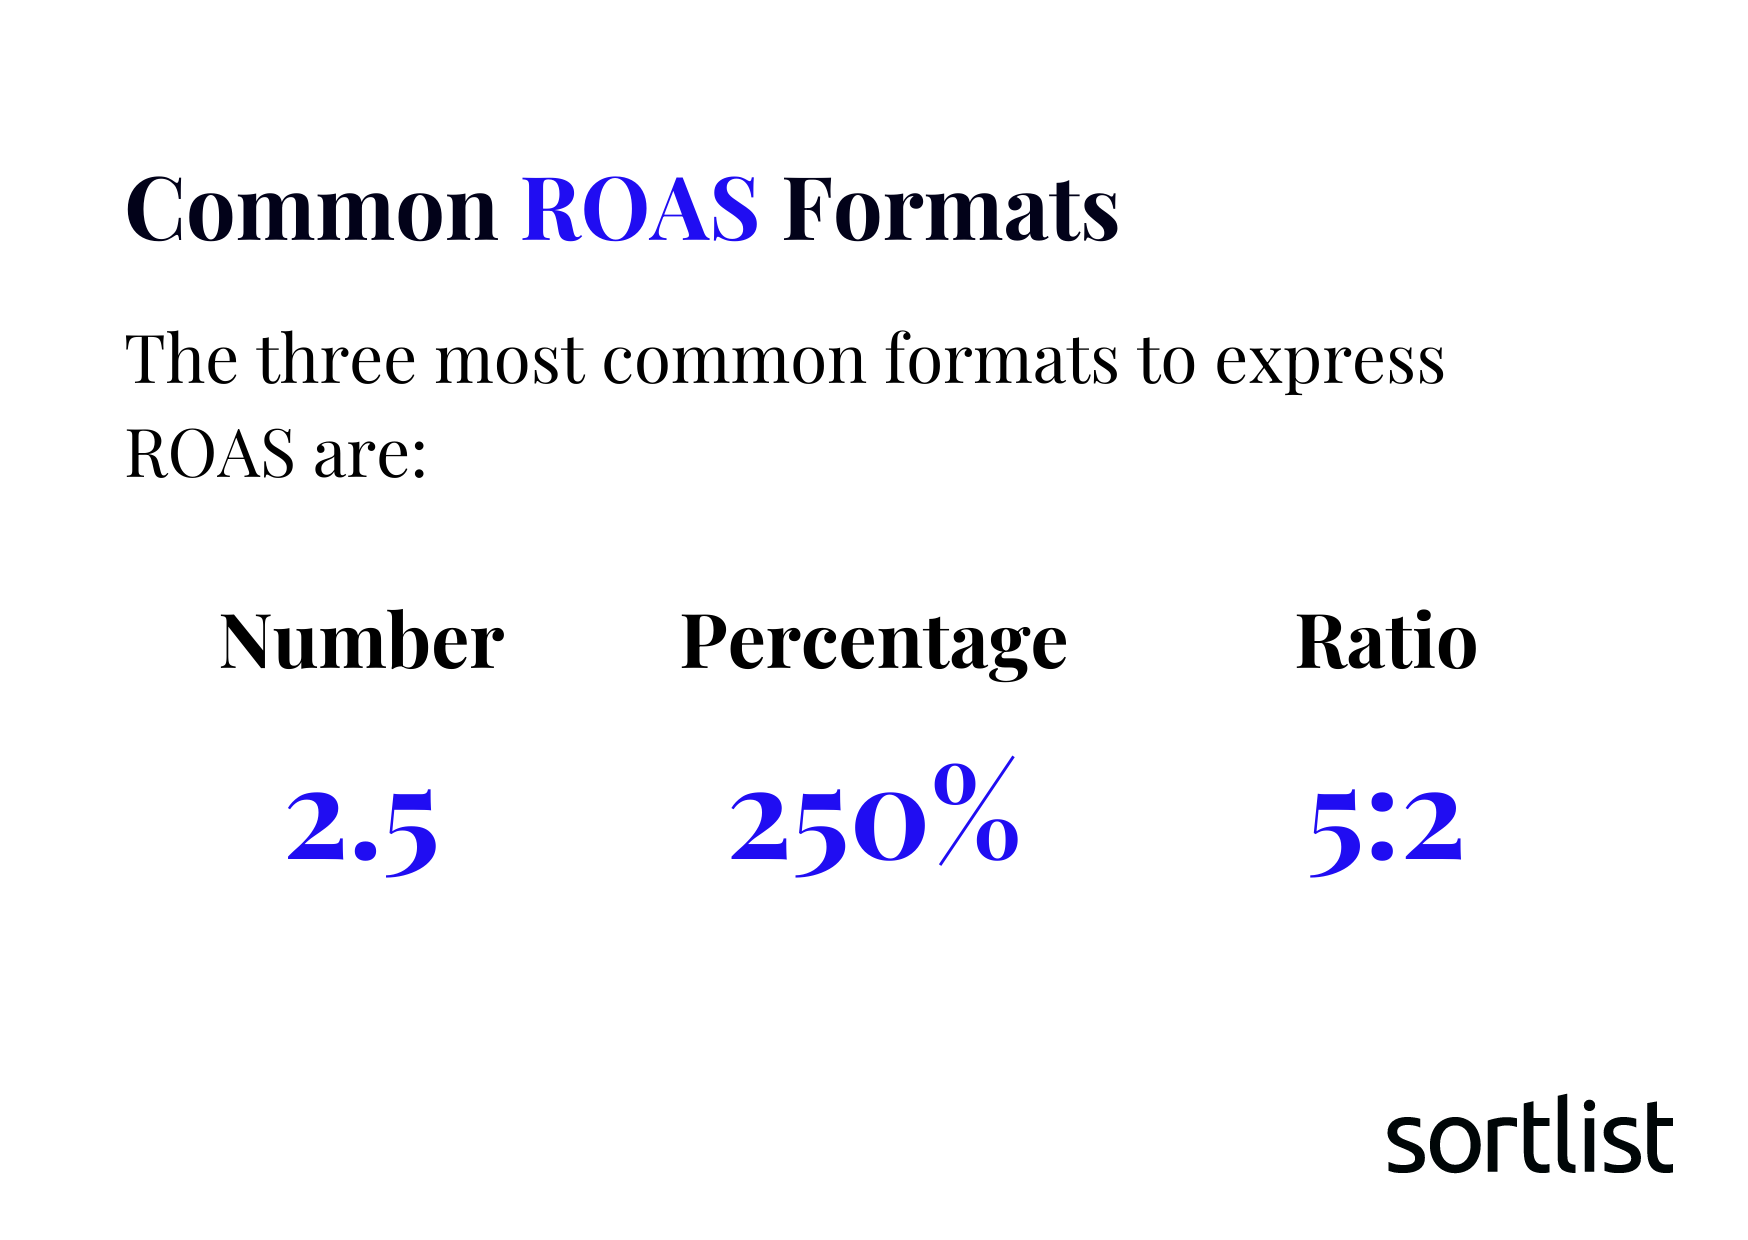 Common ROAS formats are number, percentage or ratio